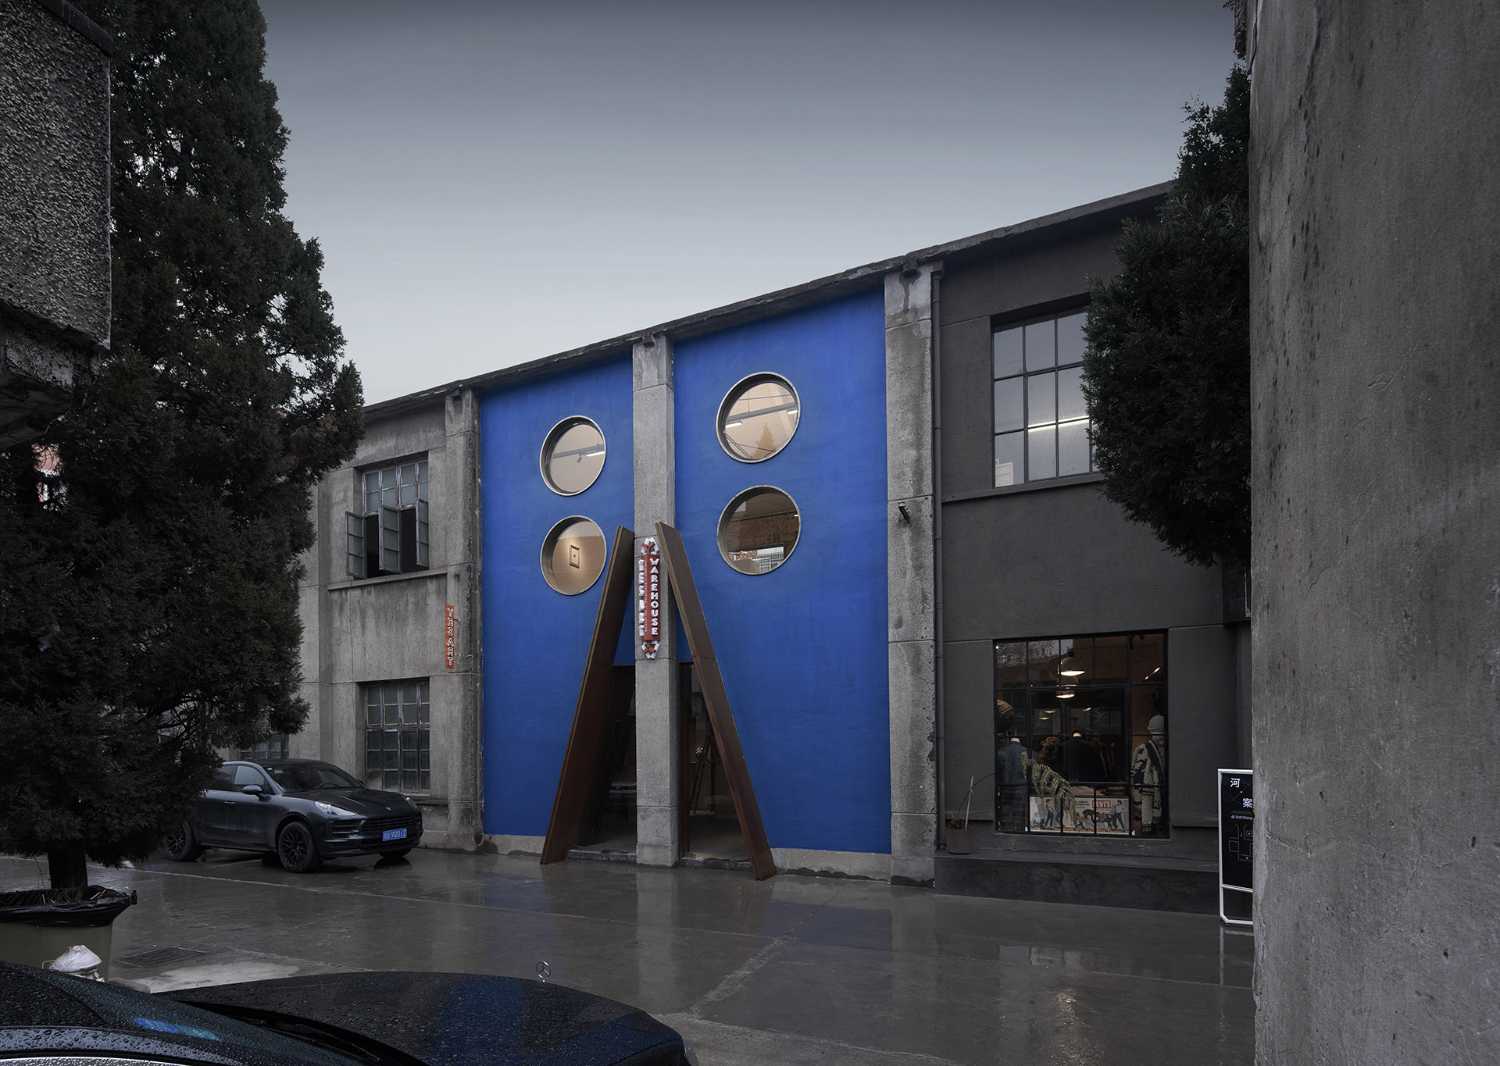 Yes Art Warehouse. Characteristic art studio takes the place of an old industrial building